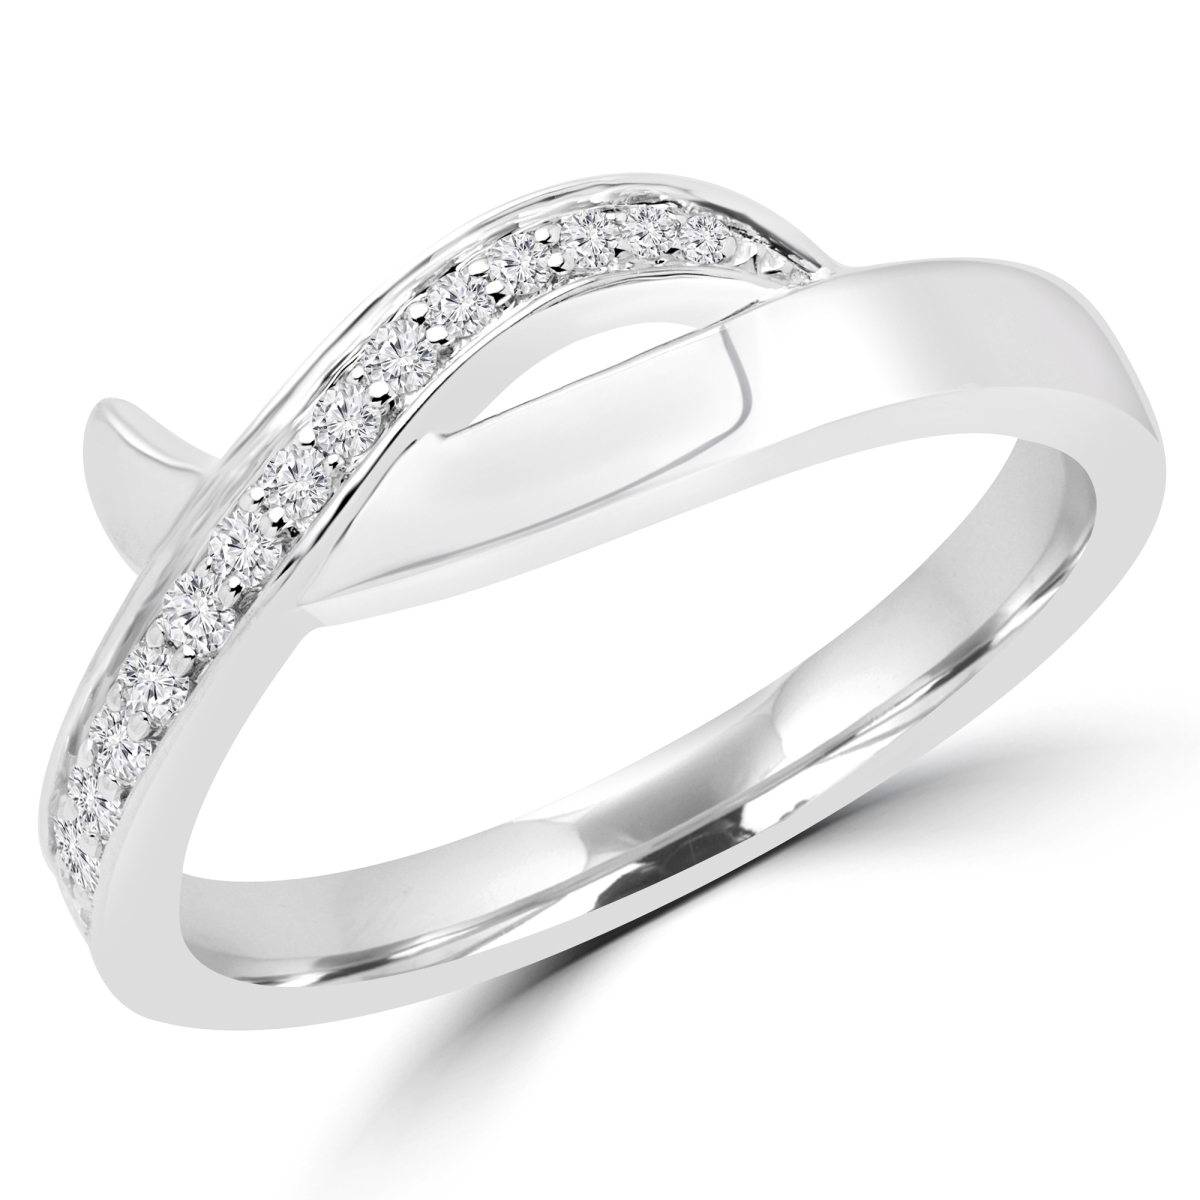 Picture of Majesty Diamonds MDR170054-3.25 0.16 CTW Round Diamond Cocktail Ring in 14K White Gold - 3.25